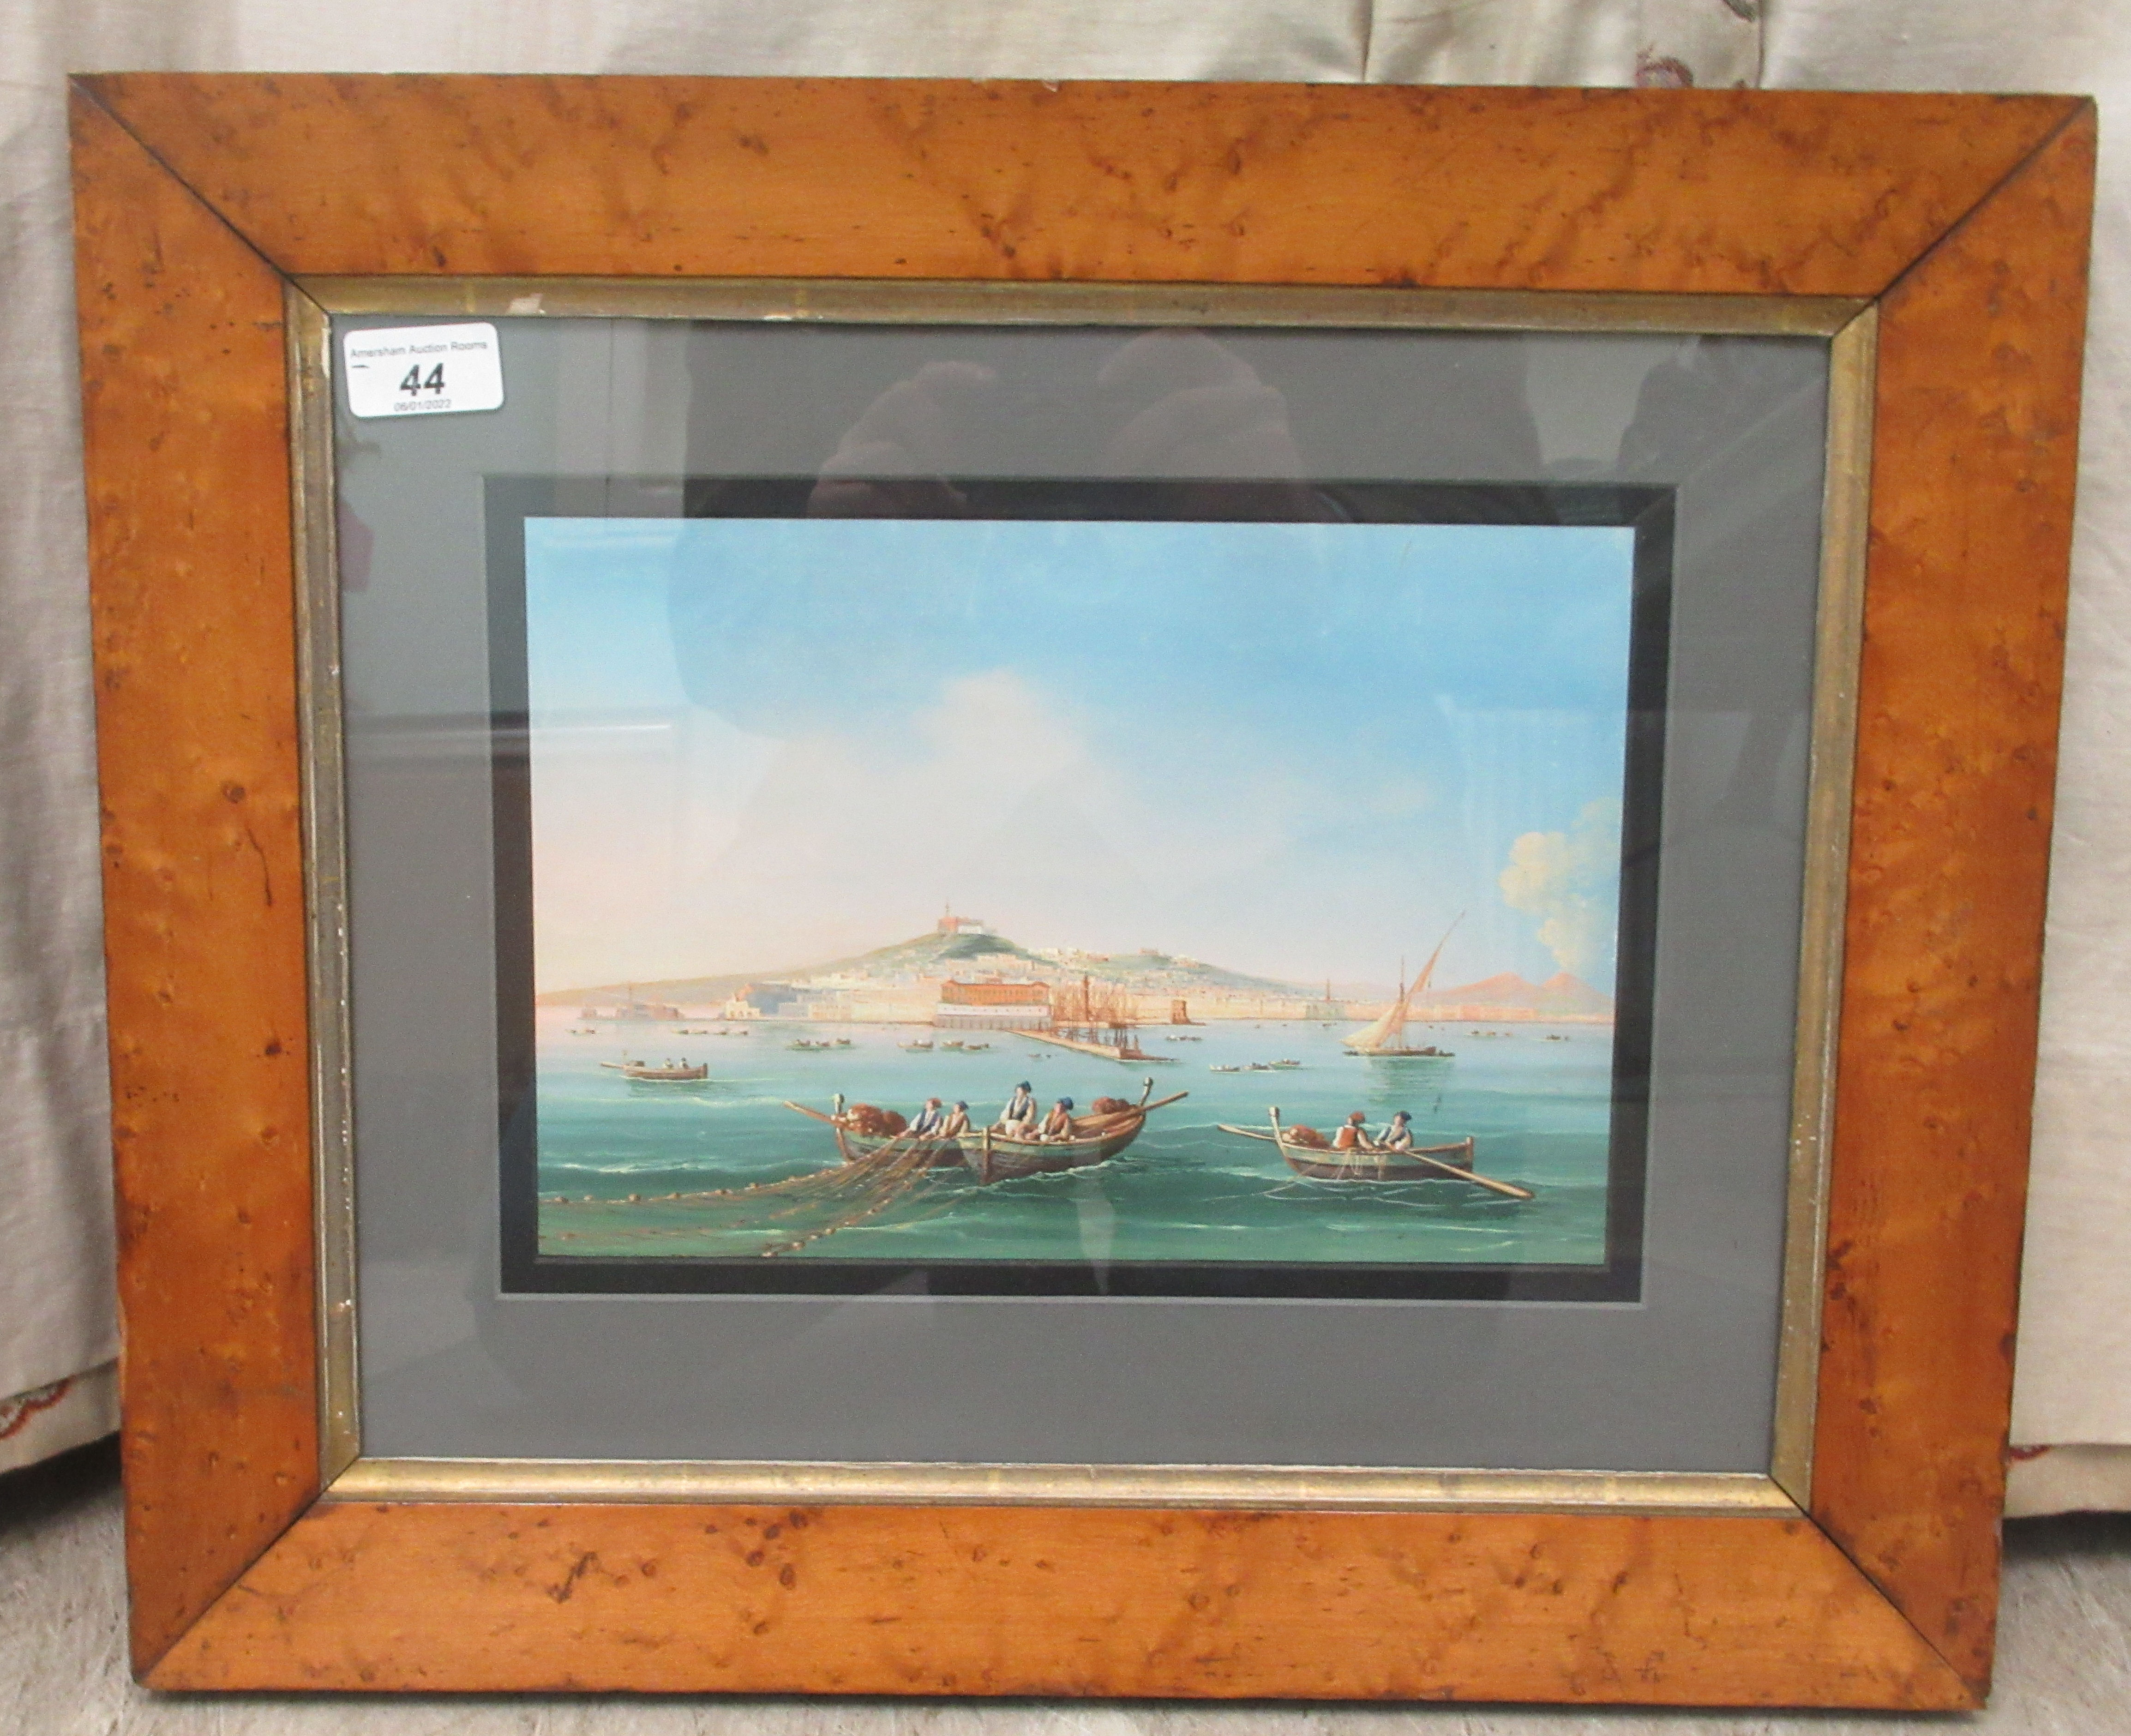 19thC Neapolitan School - offshore fishermen with buildings and a volcano beyond  gouache  7.5" x